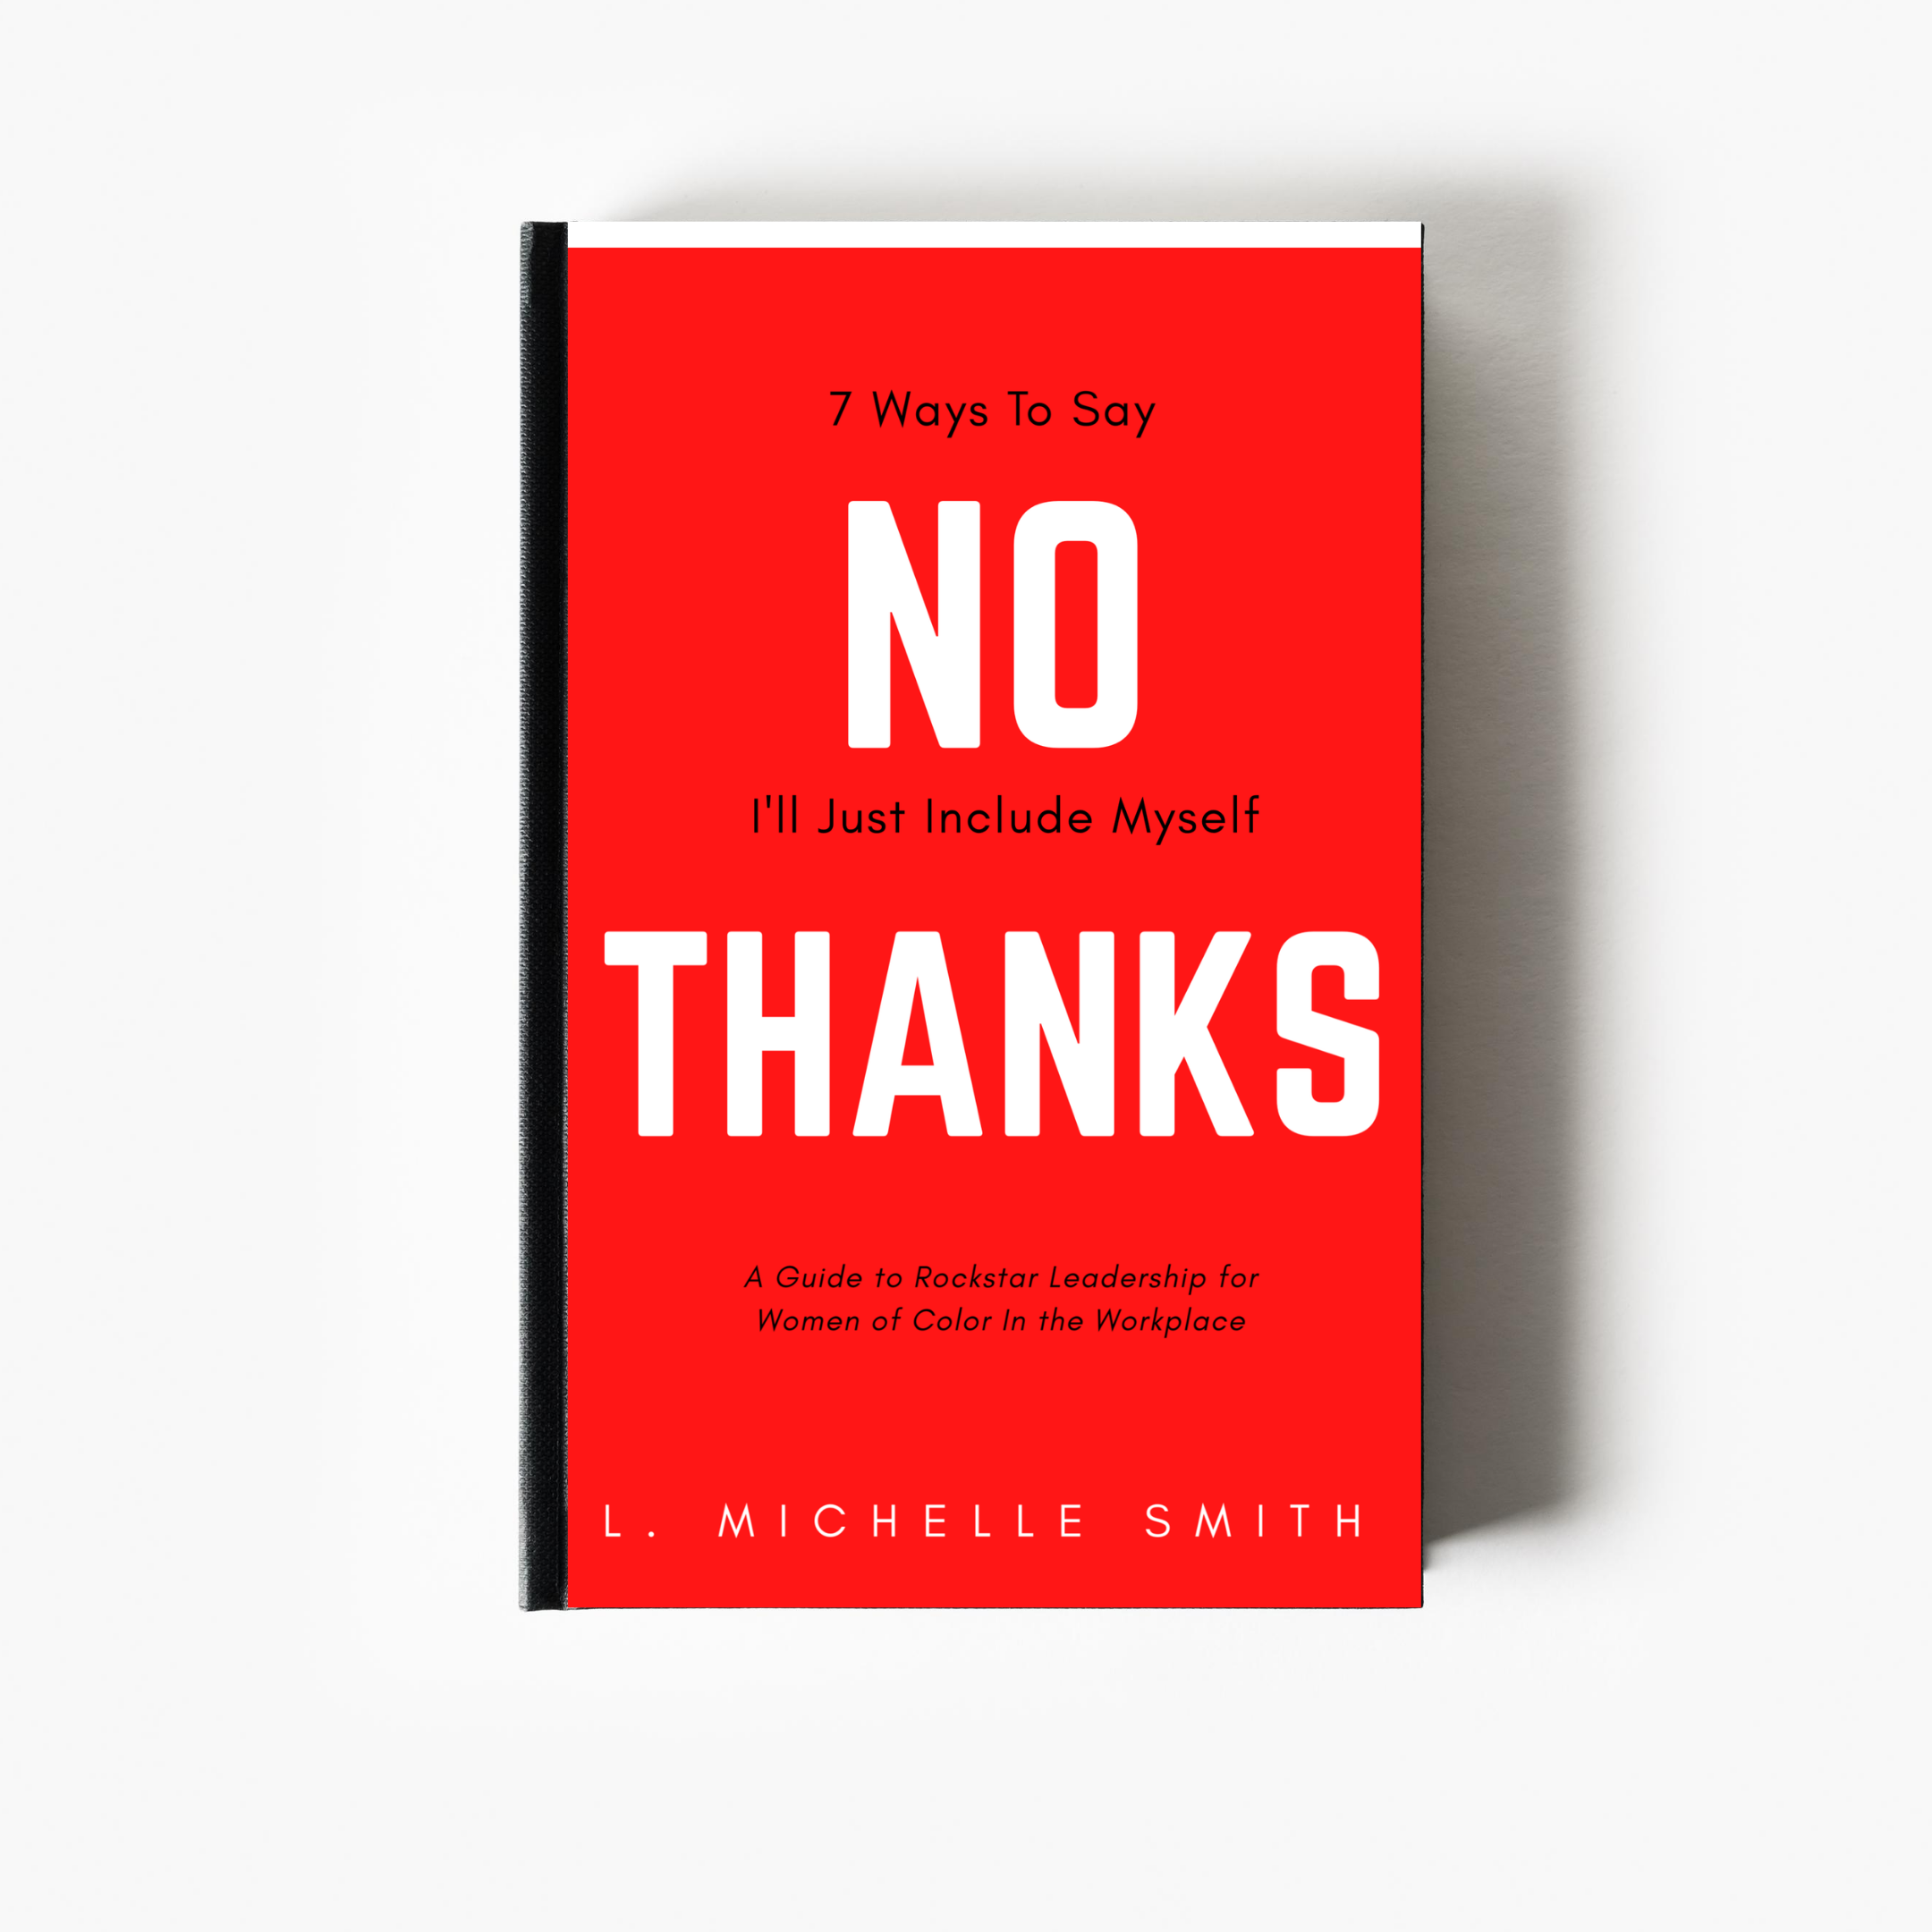 No Thanks, 7 Ways to Say I'll Just Include Myself [BOOK]